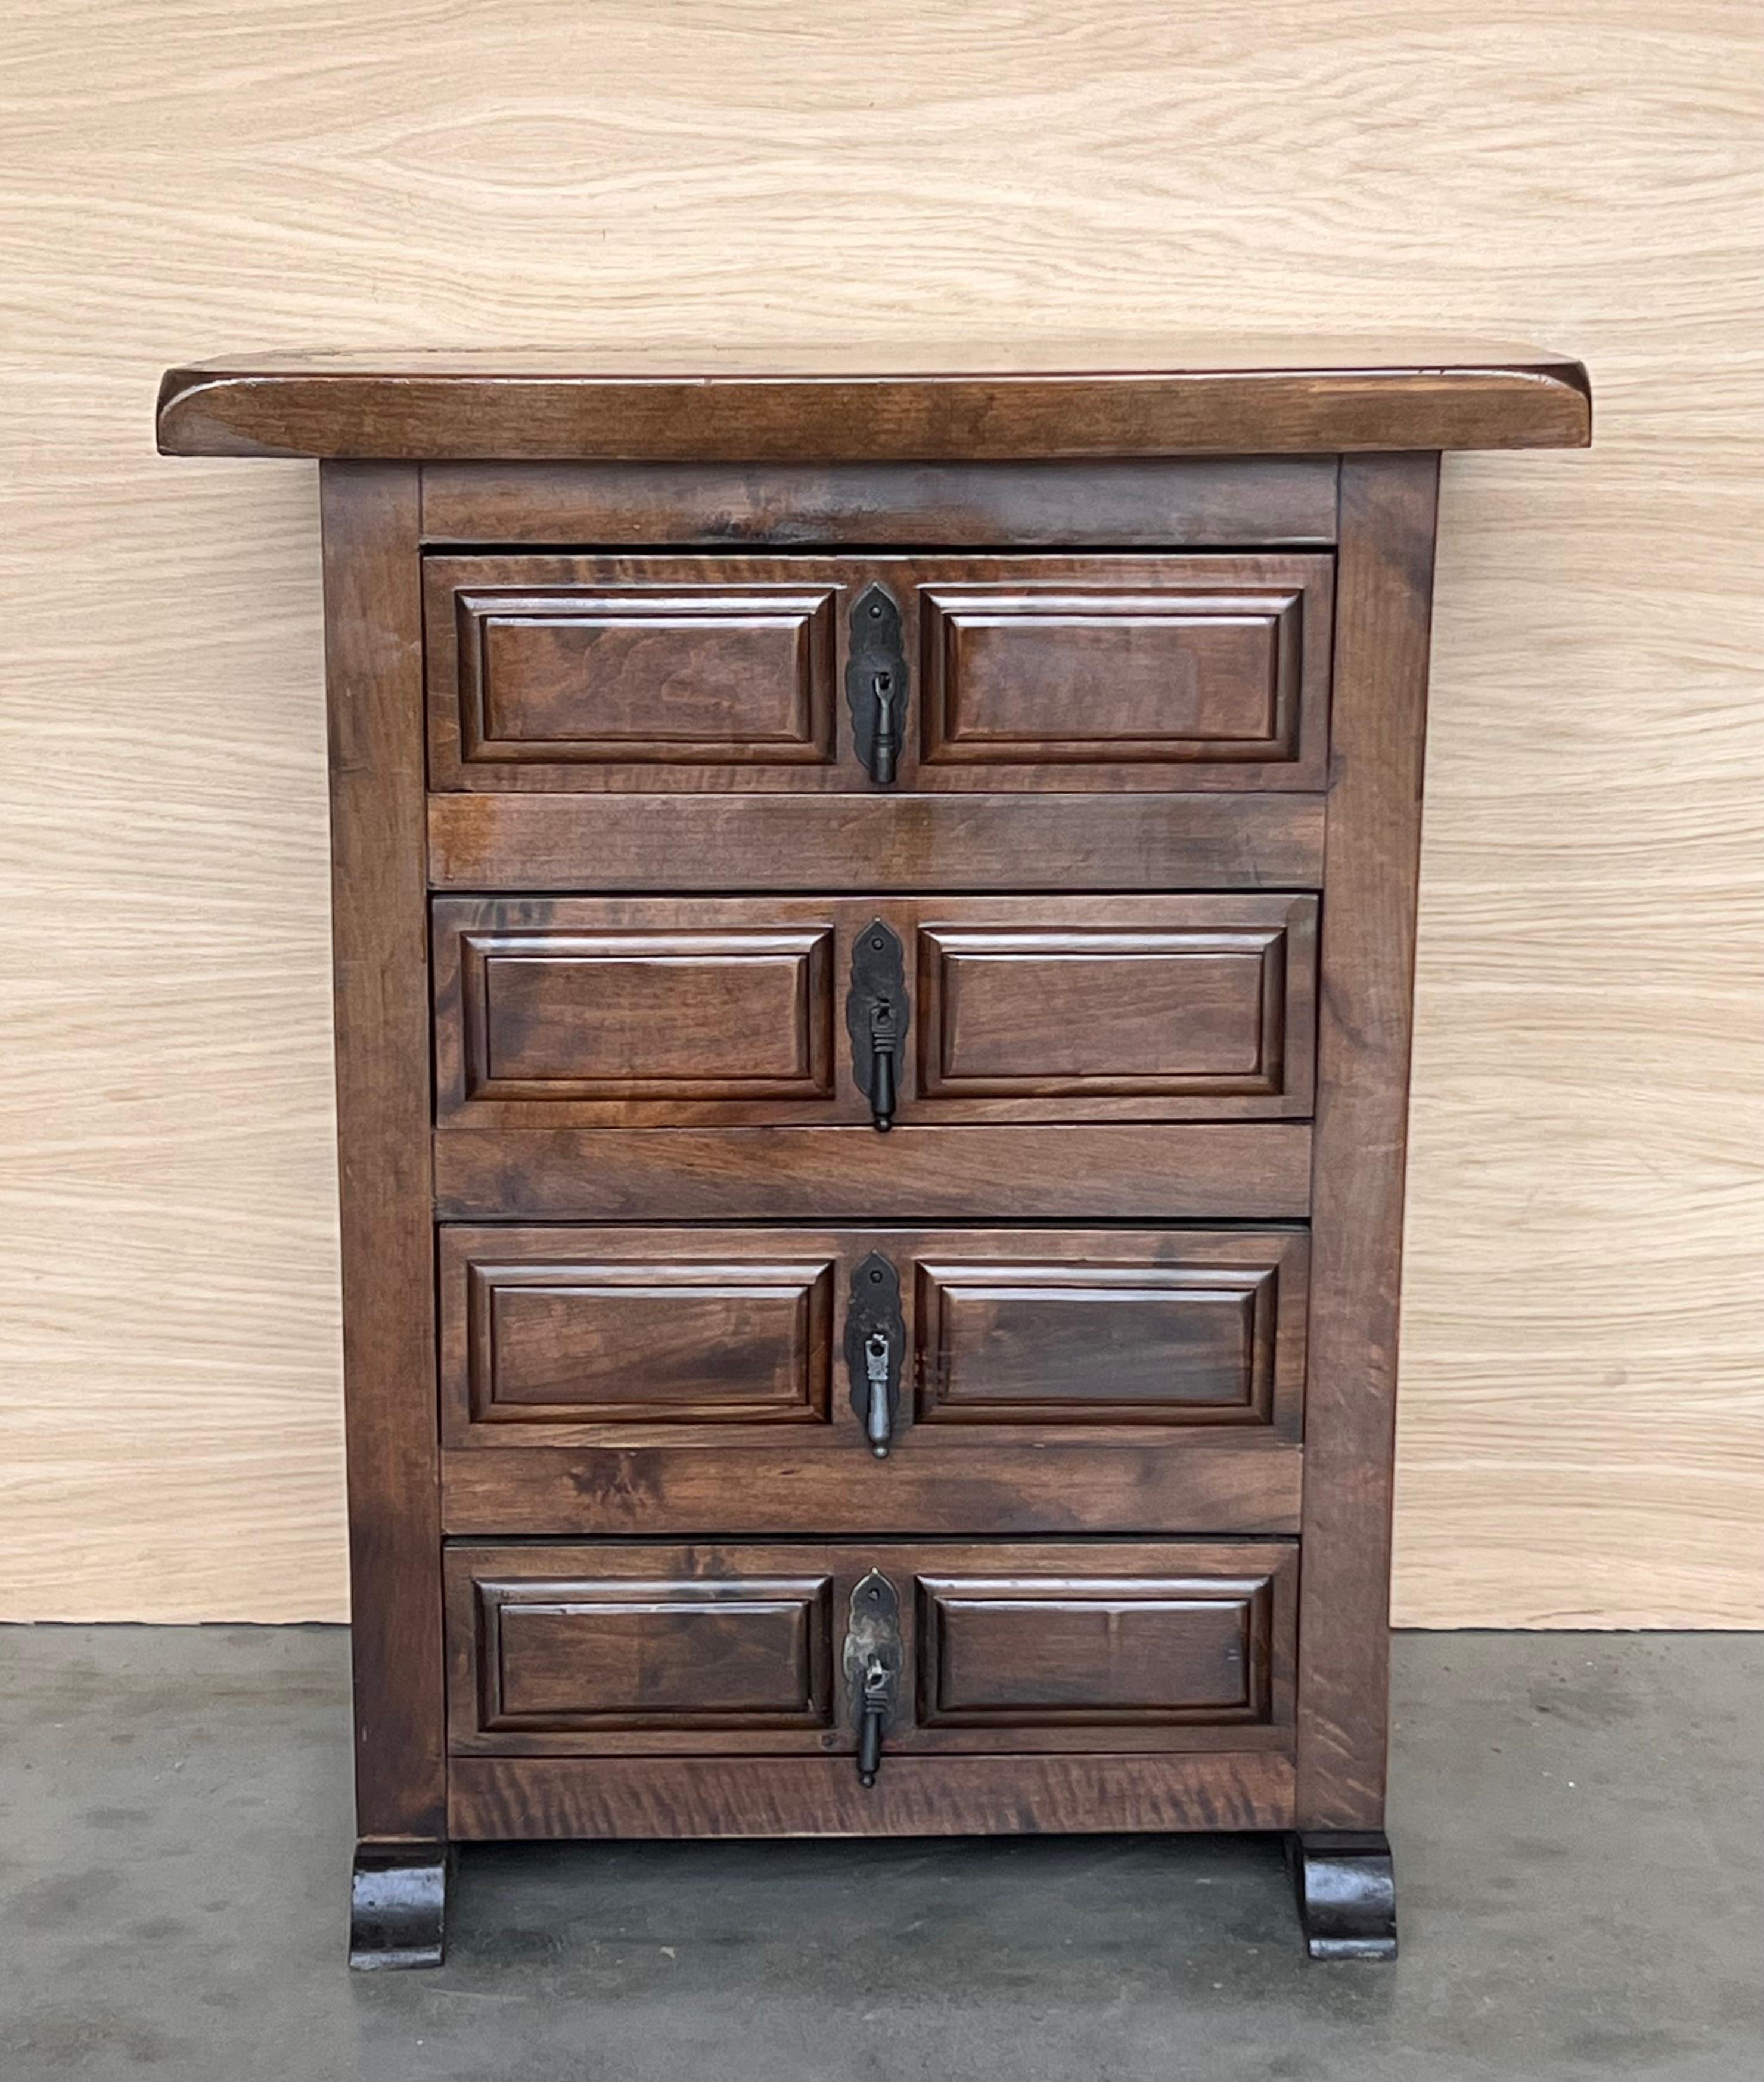 From Northern Spain, constructed of solid walnut, the rectangular top with molded edge atop a conforming case housing four drawers paneled with solid walnut, raised on two plint legs.
Carved on the molding sides , drawers and legs of the front and